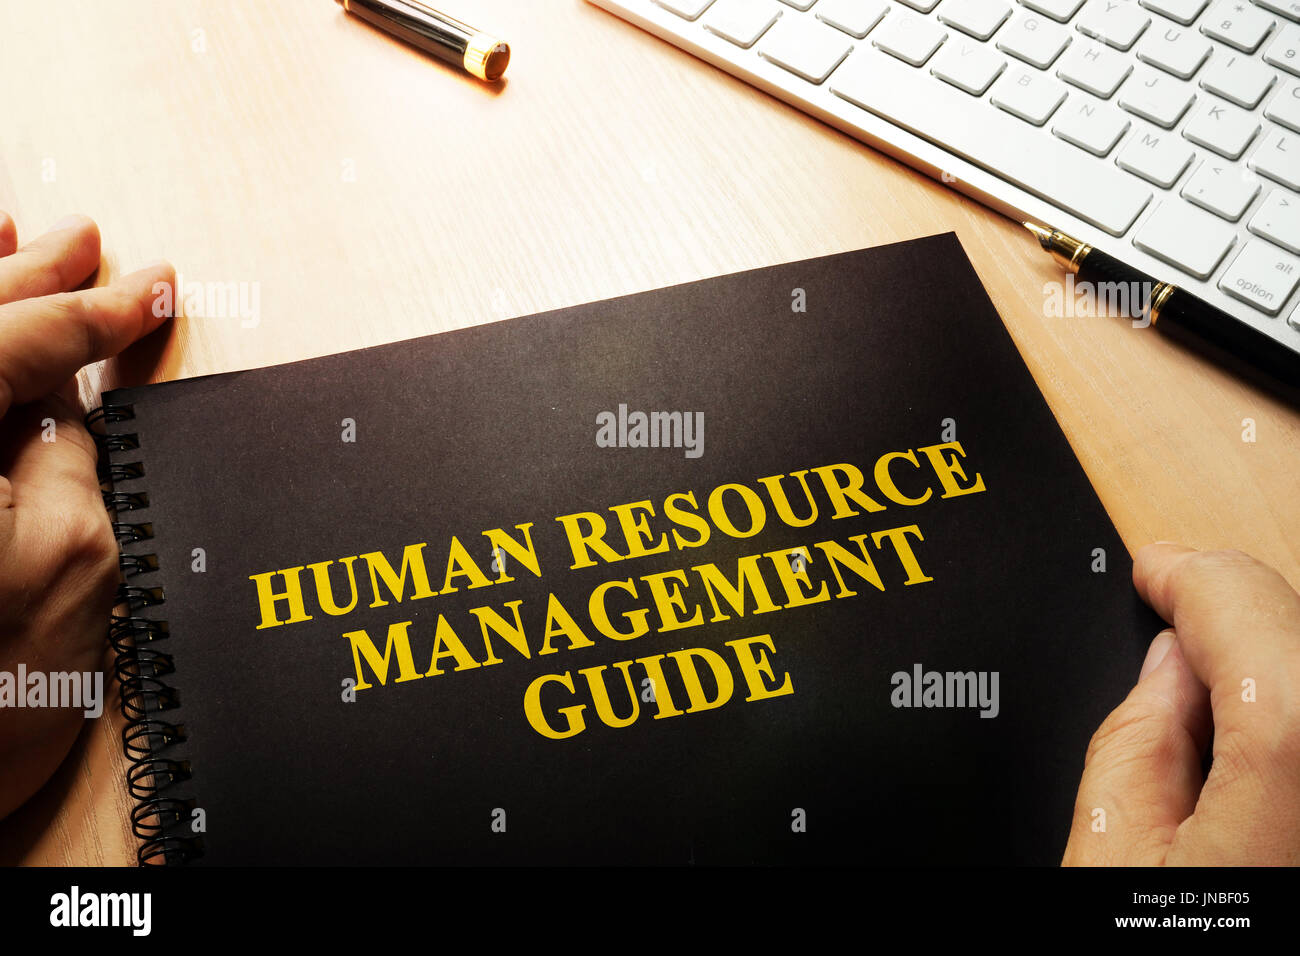 Human Resource Management Guide (HRM) concept. Stock Photo